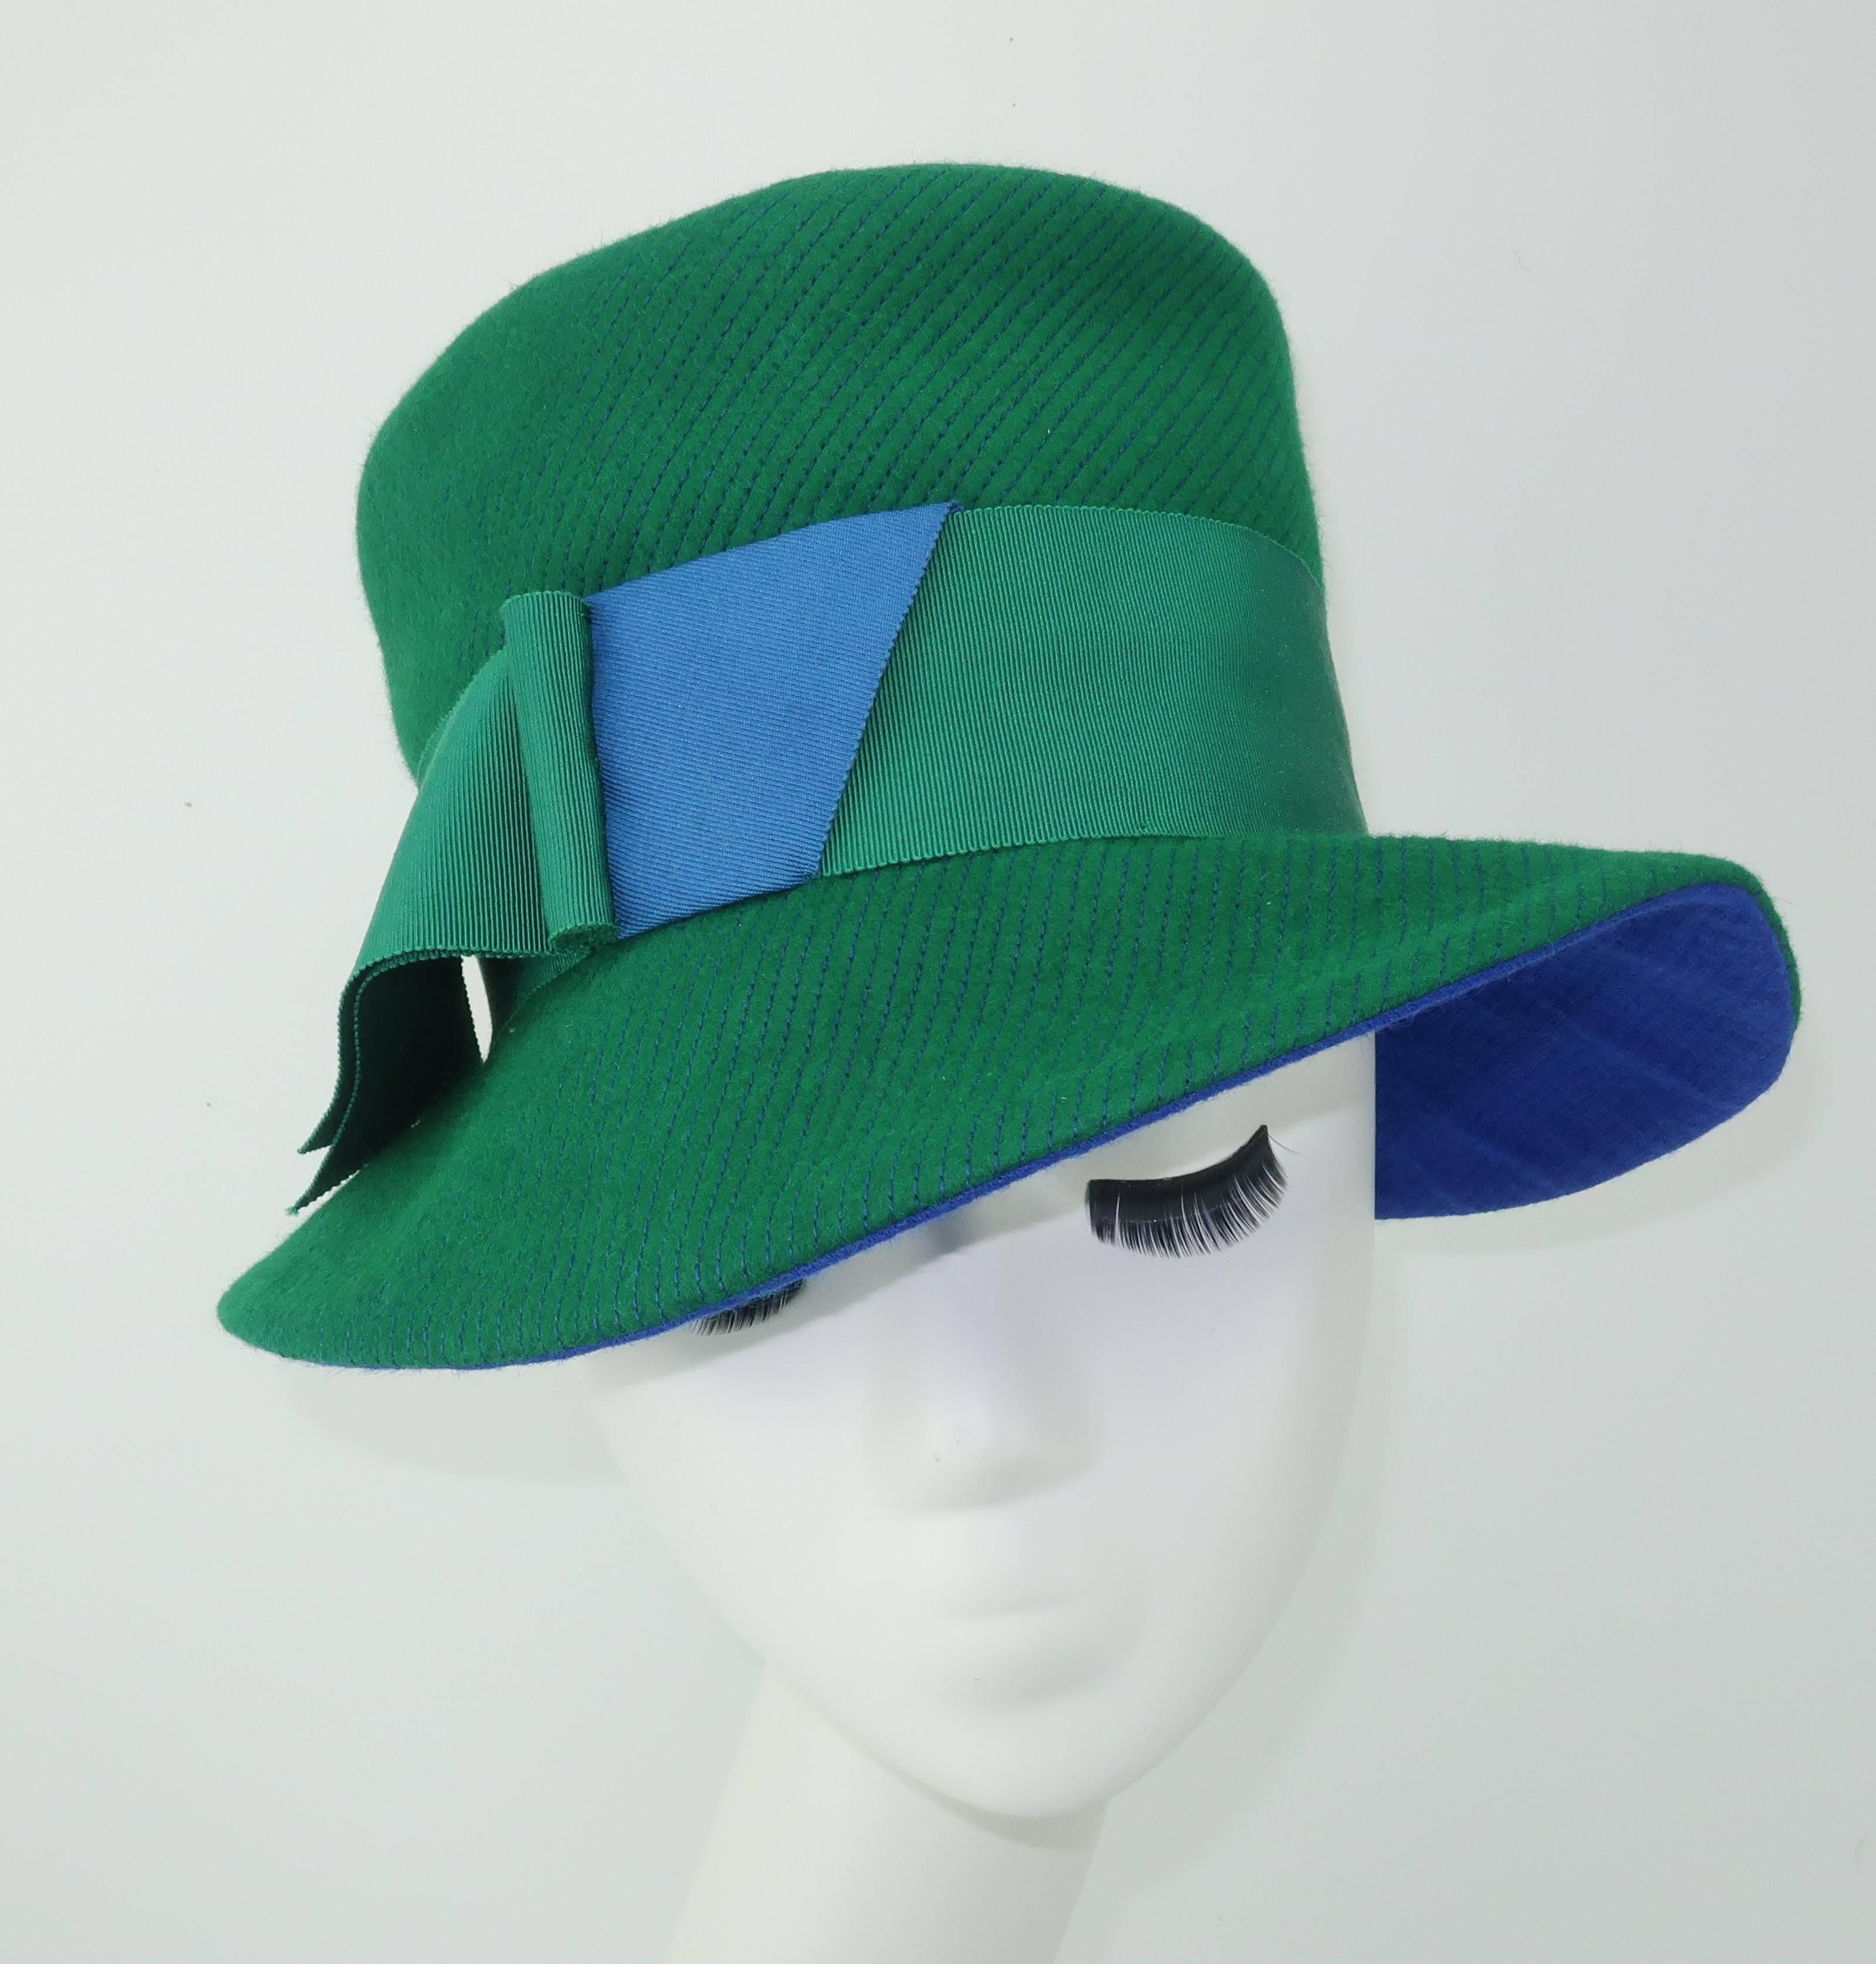 It is all in the details with this Amy of New York floppy brimmed hat.  The bright green exterior is formed with a soft wool featuring an electric blue contrast stitching which coordinates with the lining.  The brim is decorated with a two tone